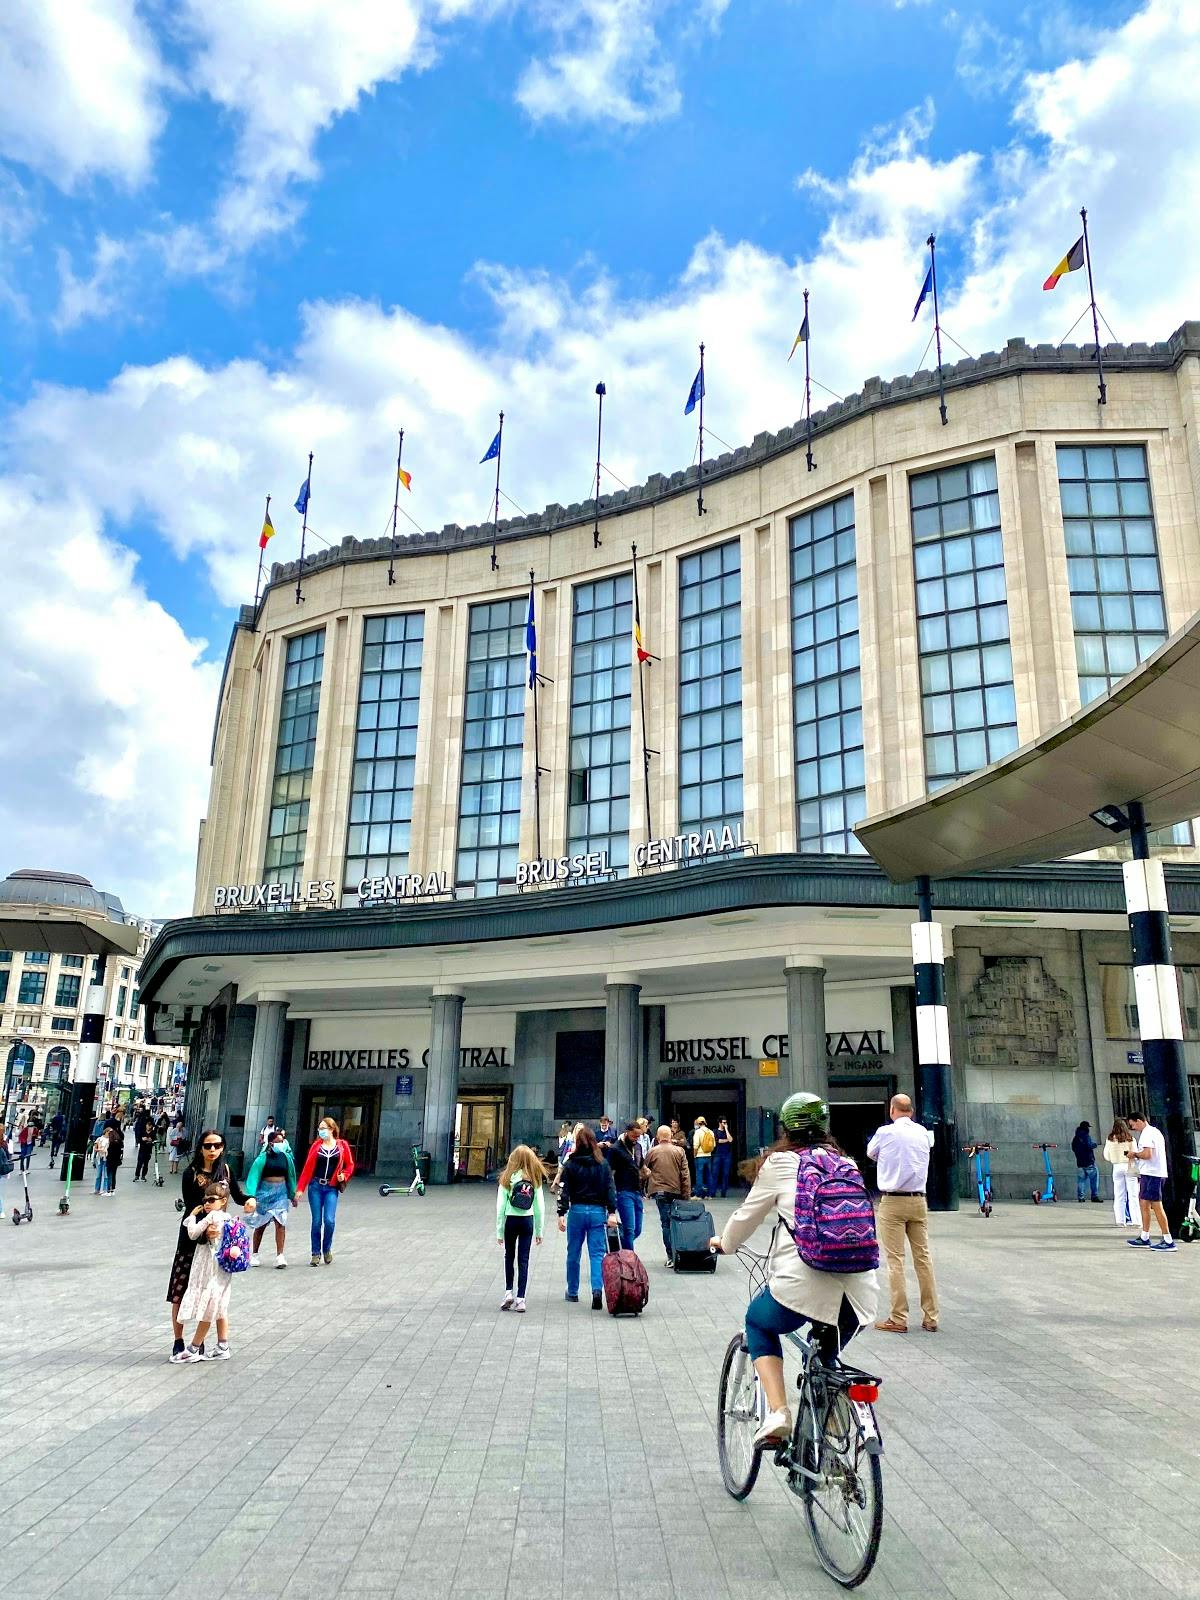 Image - Brussel-Centraal